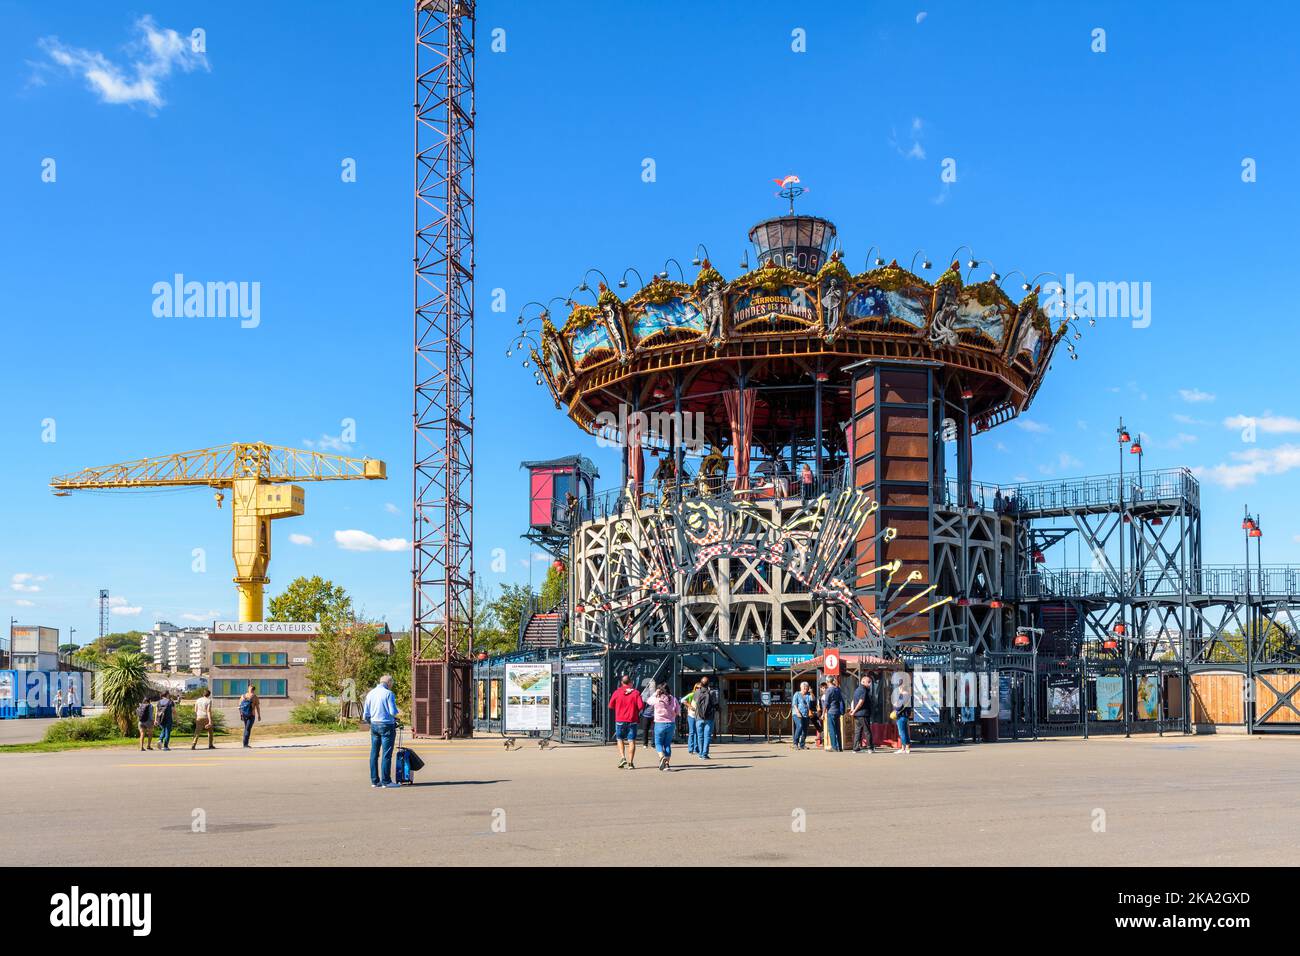 The Marine Worlds Carousel is part of the Machines of the Isle of Nantes tourist attraction, with the yellow Titan crane in the distance. Stock Photo